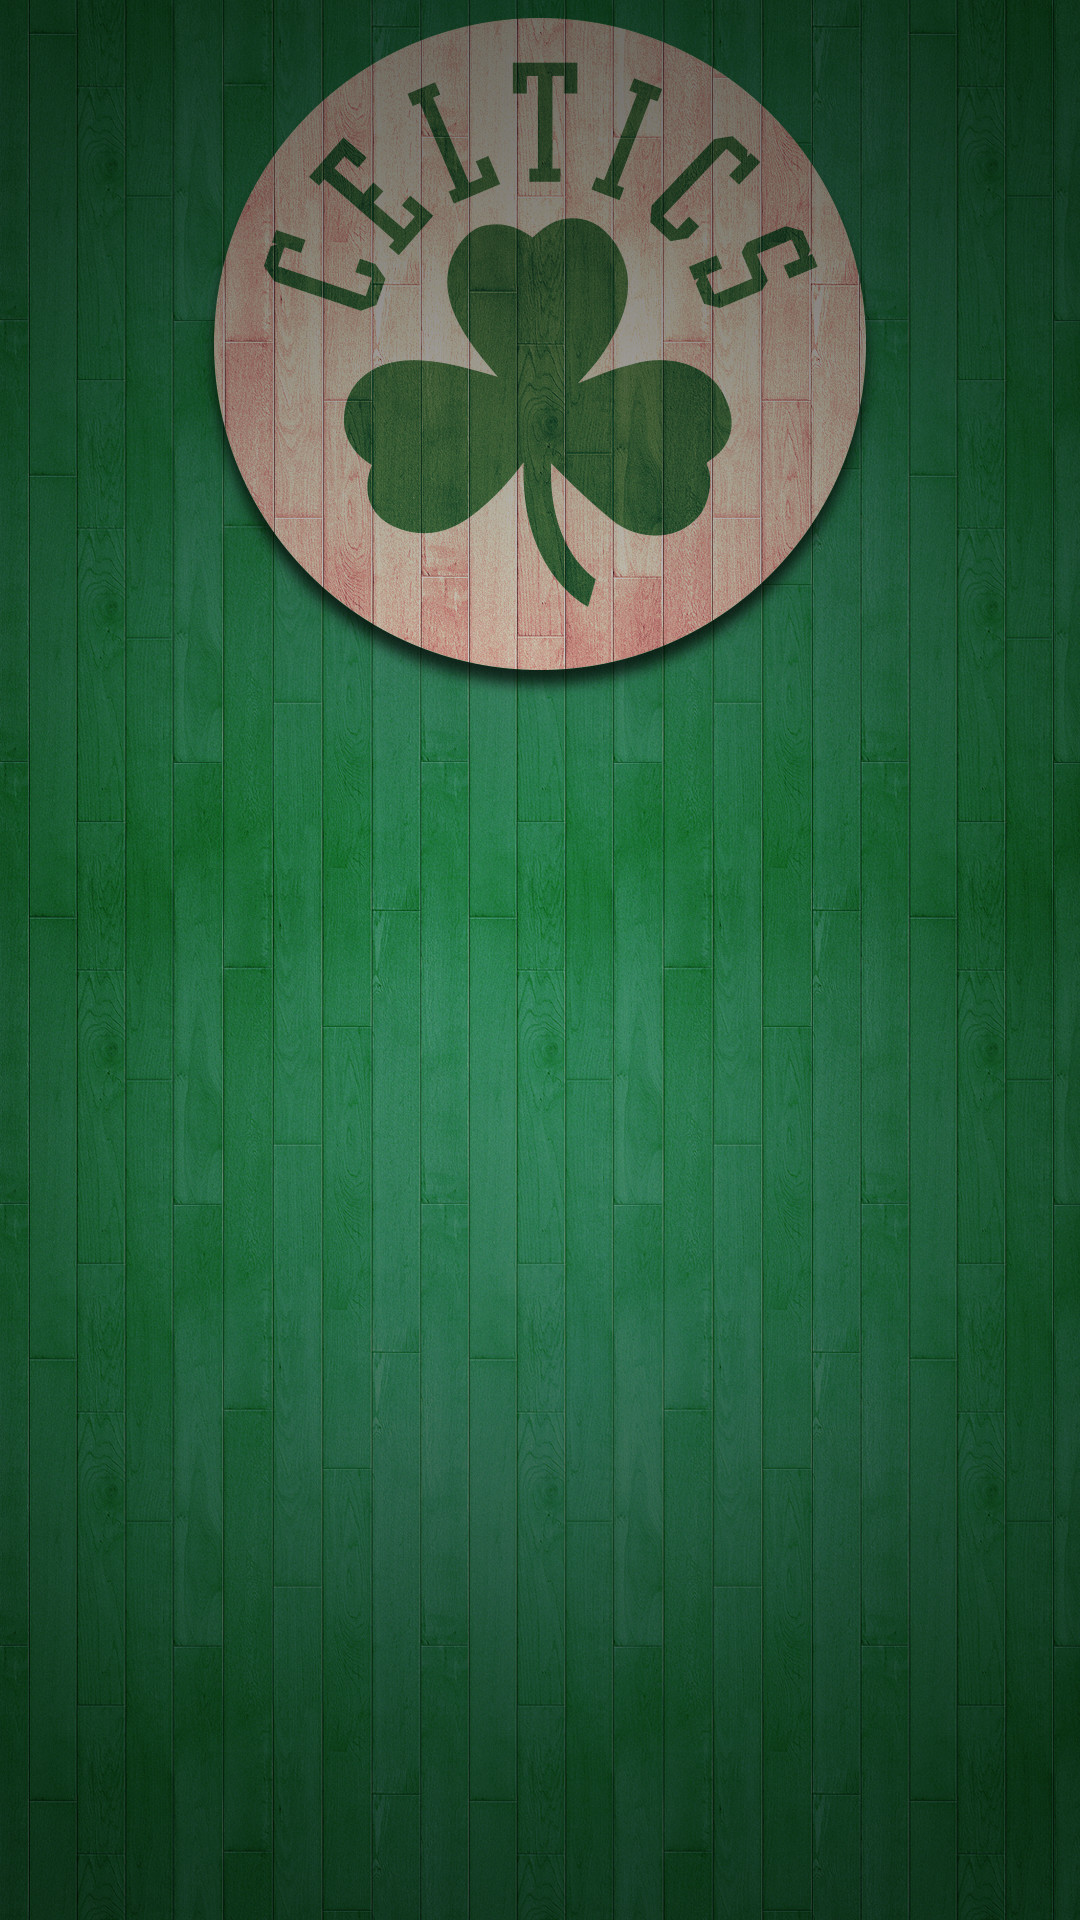 Boston Celtics 2017 Mobile home screen wallpaper for iPhone, Android, Pixel